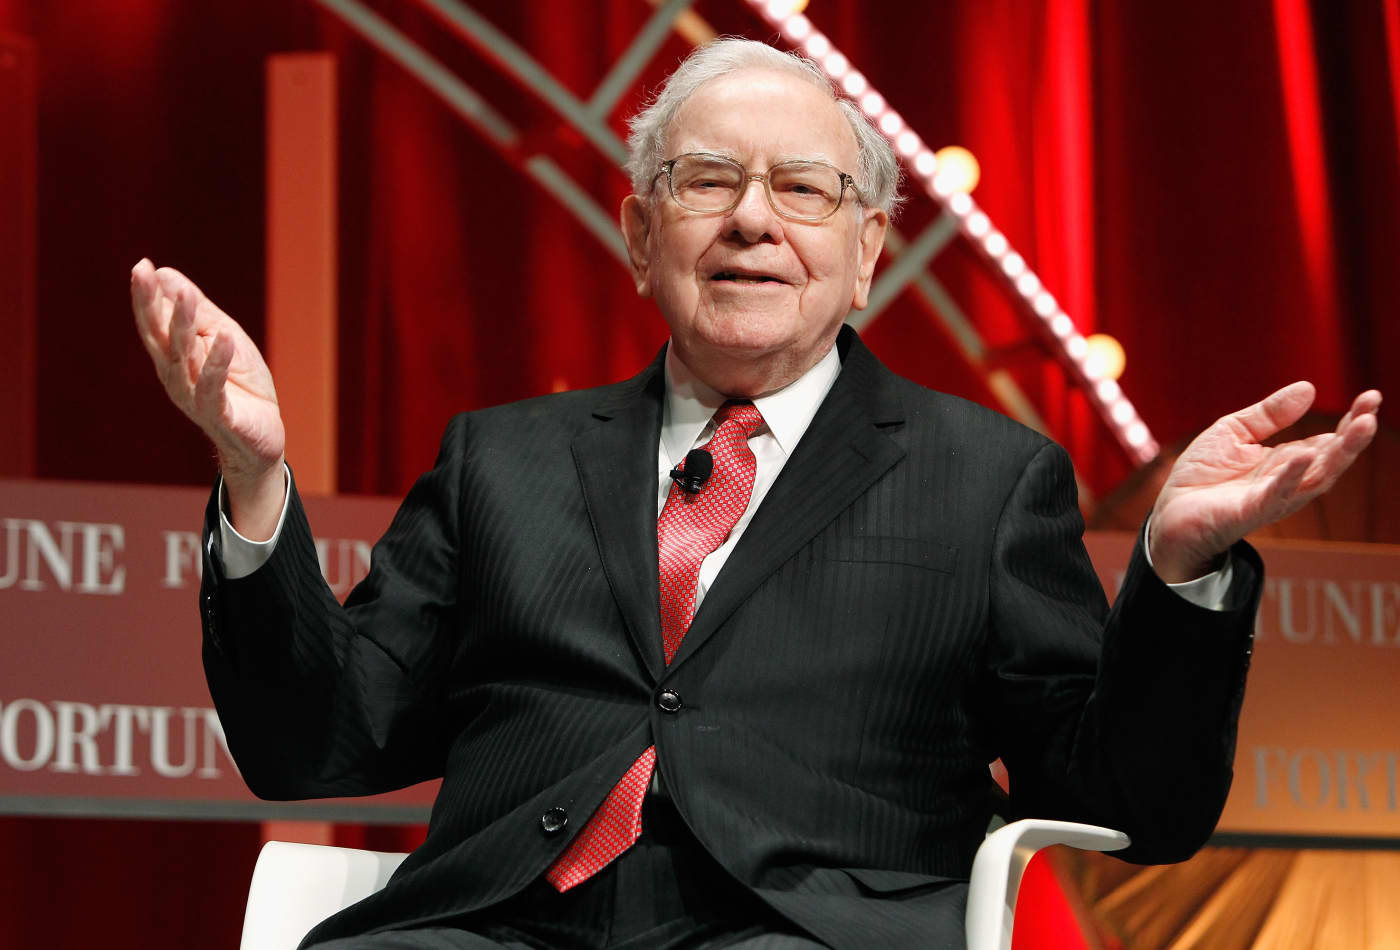 One of the greatest lessons Warren Buffett taught his son: 'Wealth ethic' isn't the same as 'work ethic'